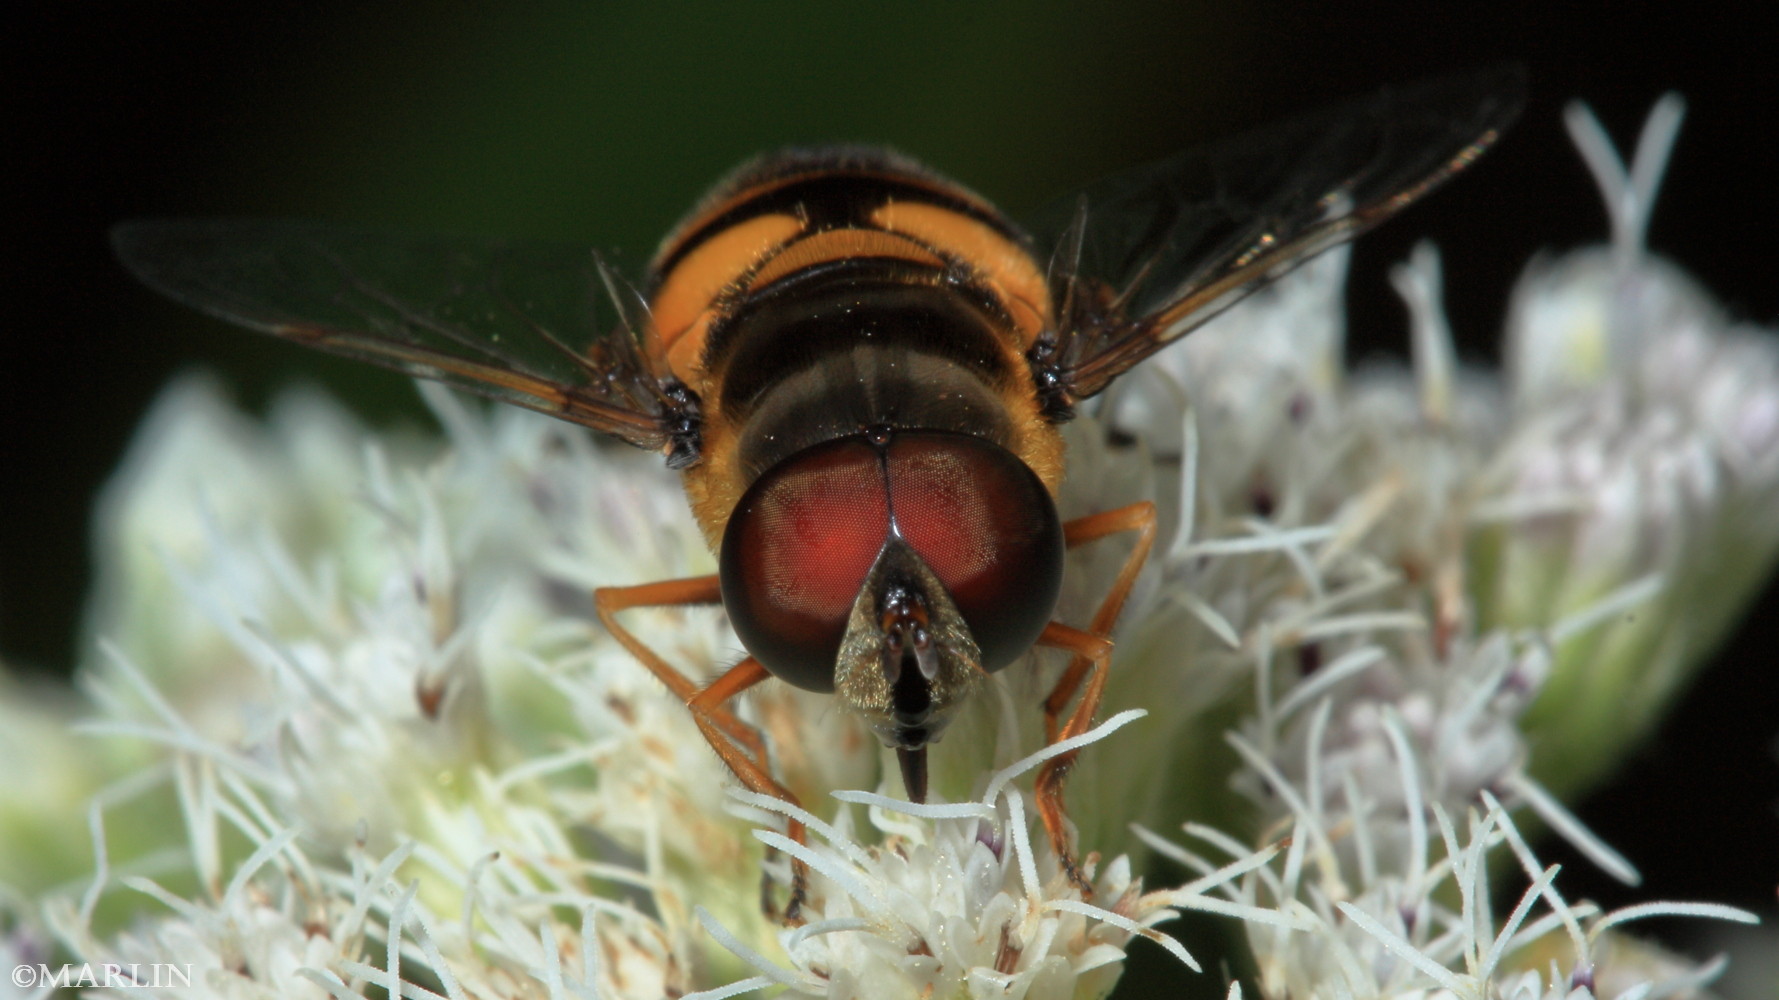 extreme close up color photo Transverse Flower Fly head and eyes detail